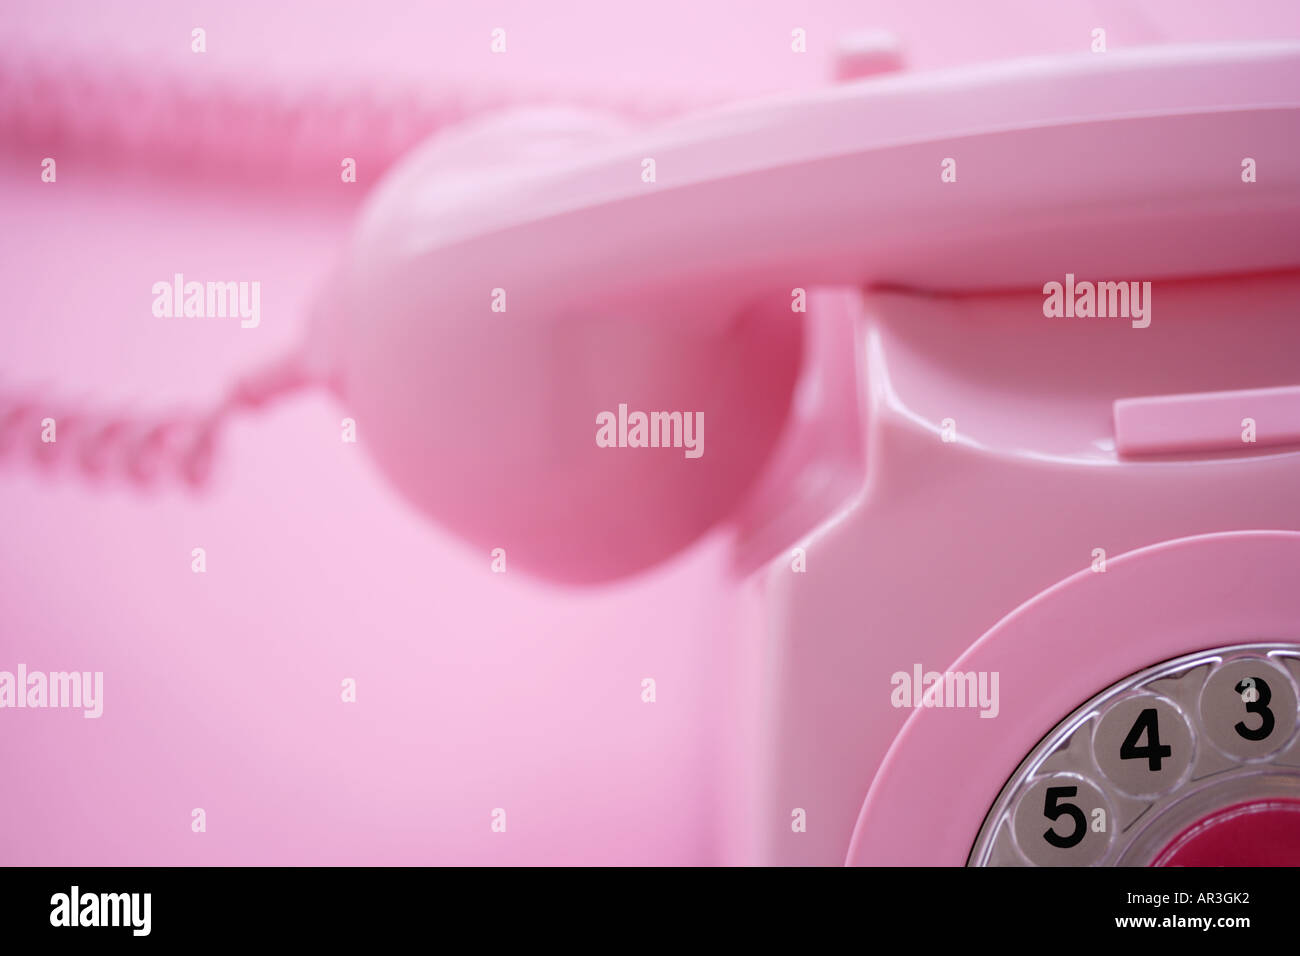 Detail of a pink telephone receiver on pink background Stock Photo